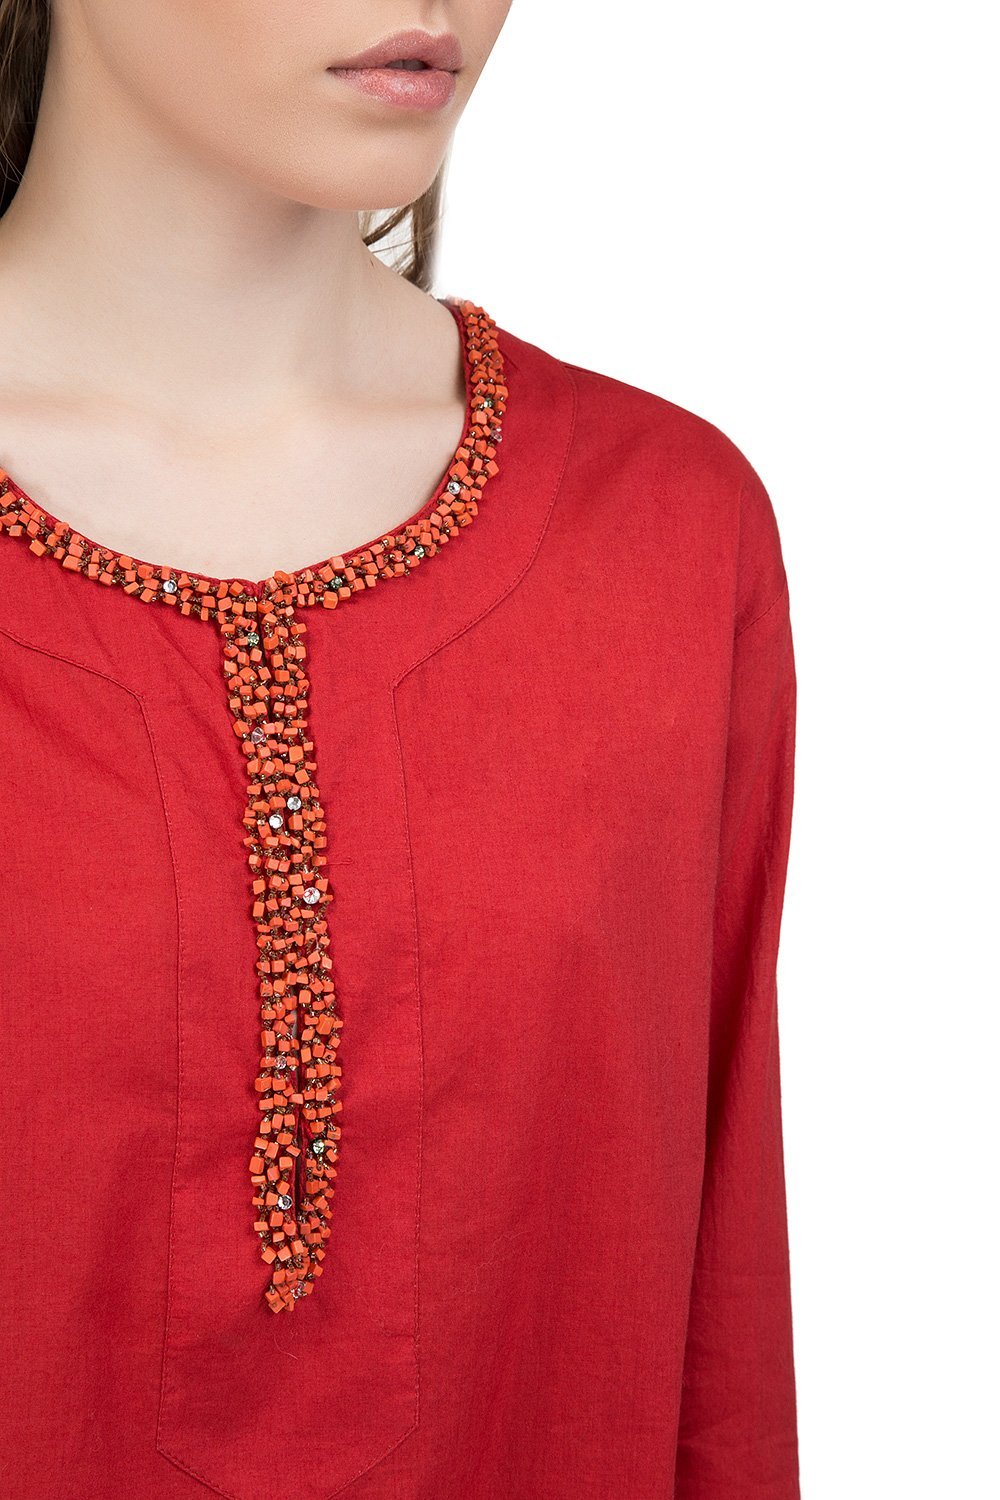 Divine cotton tunic with long sleeves